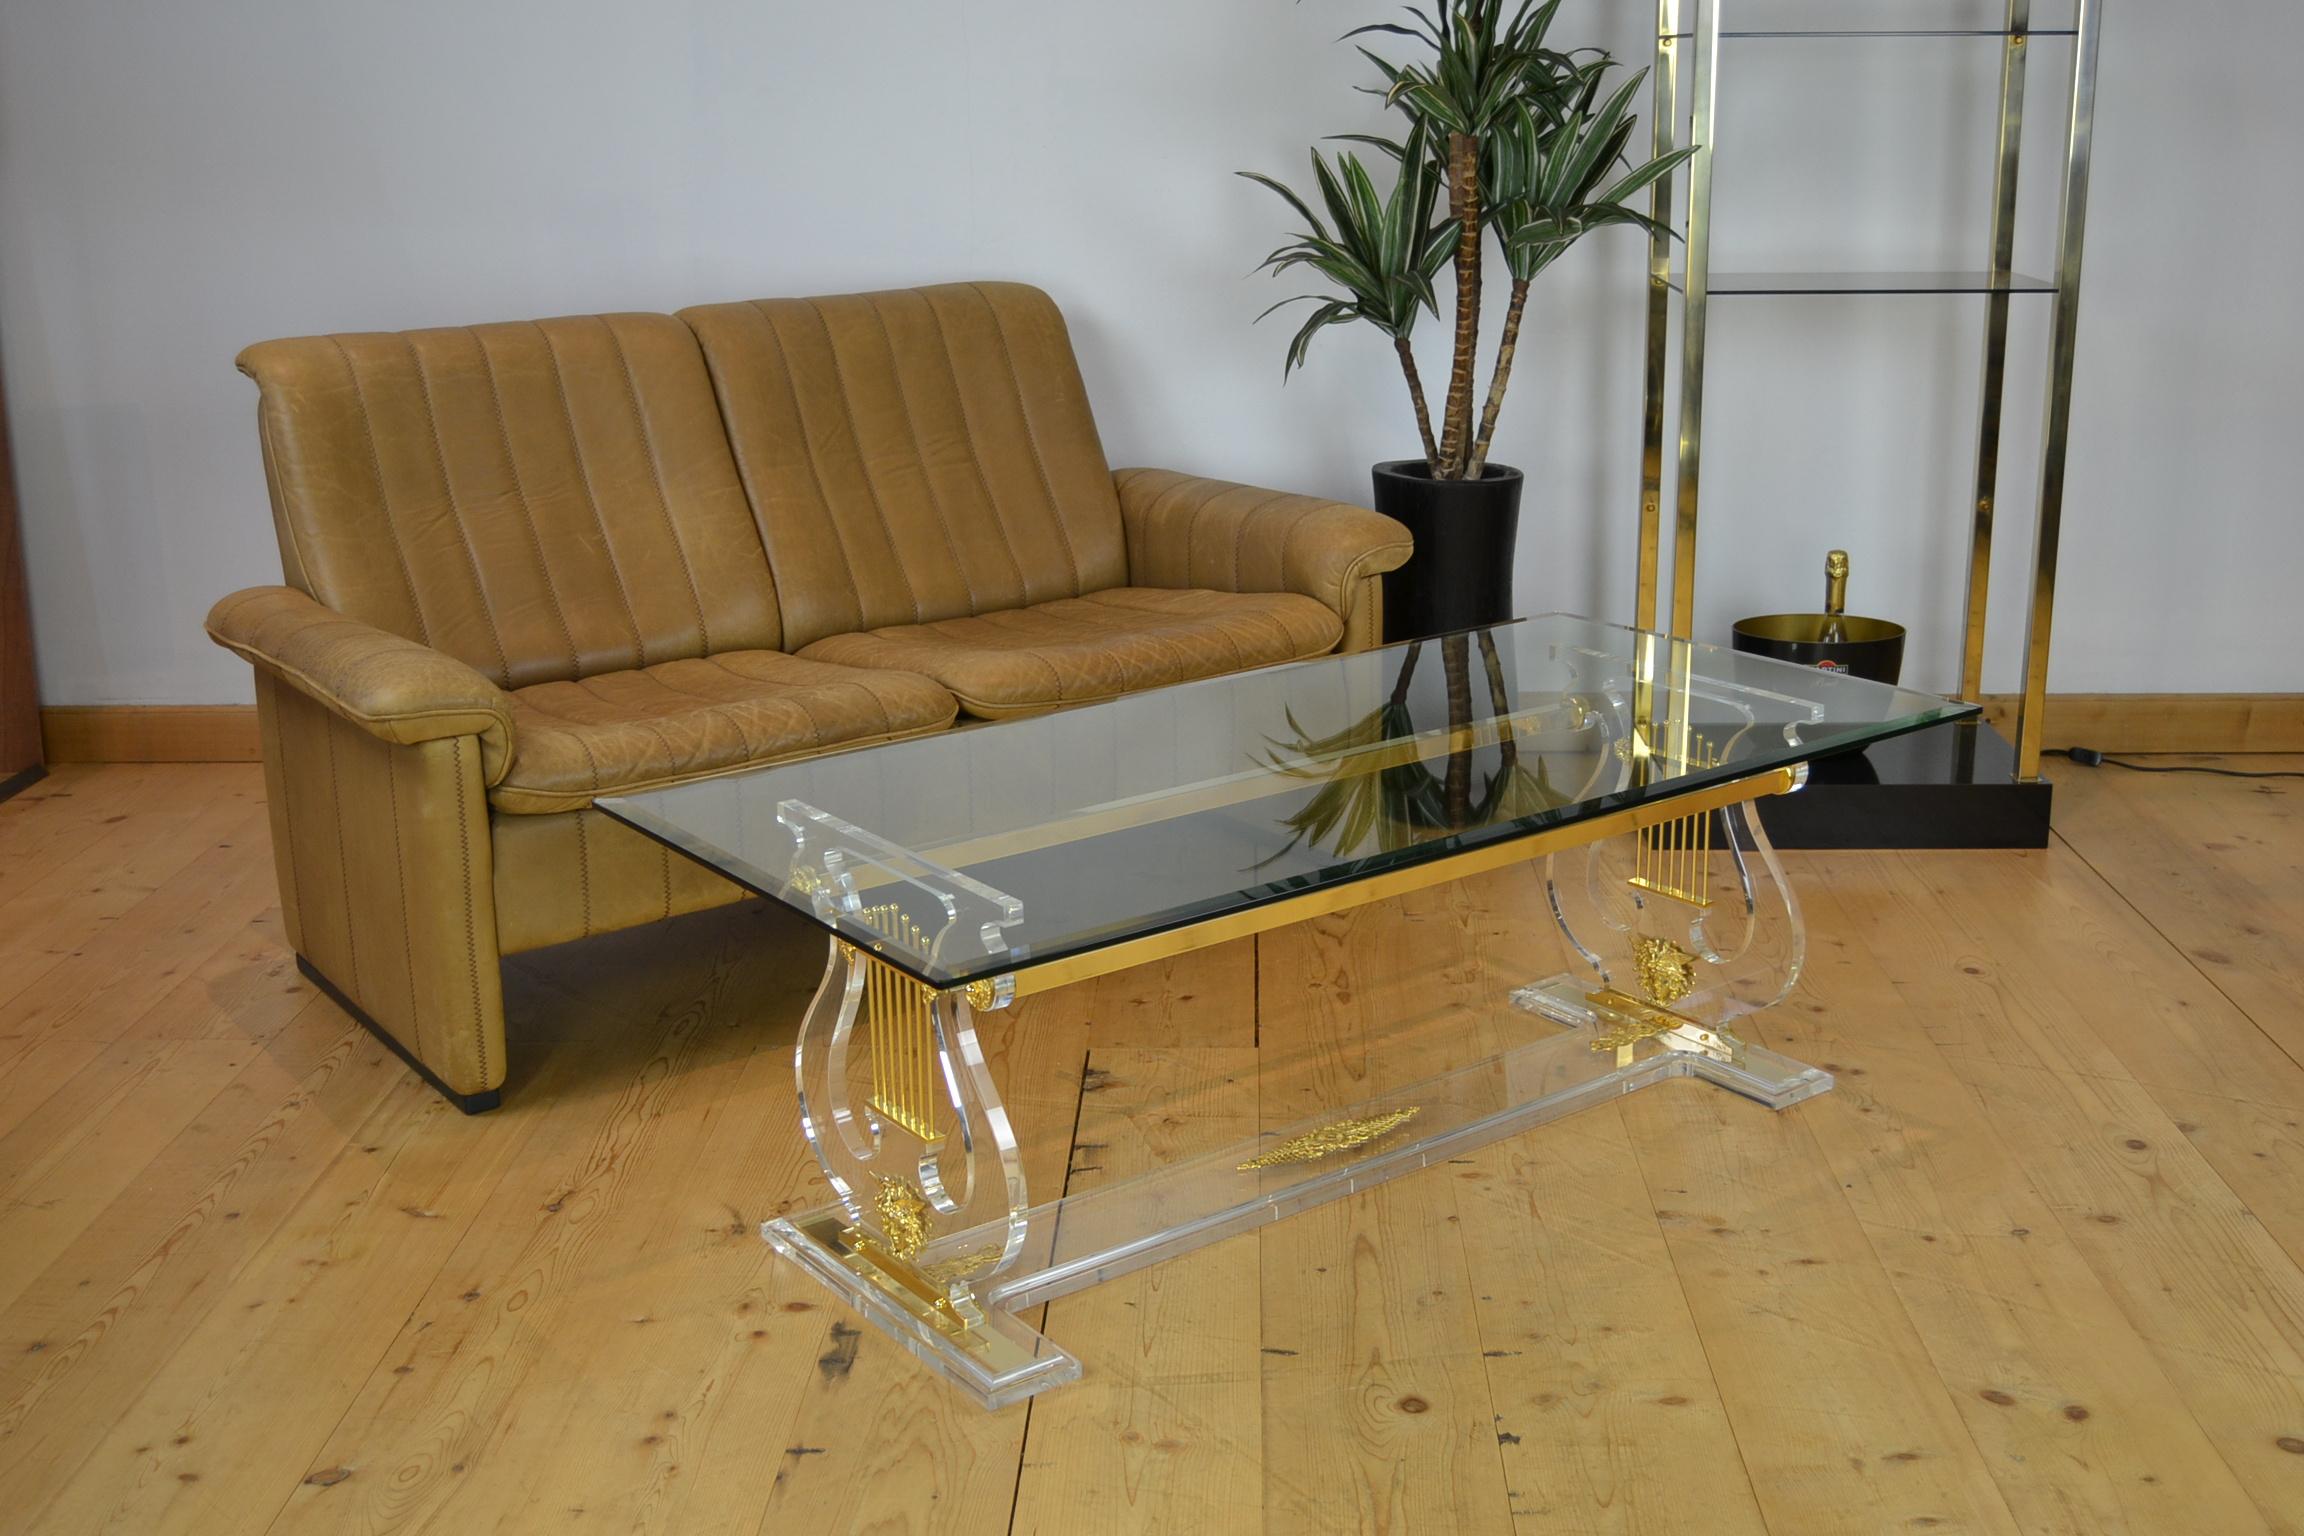 Lyre coffee table or harp coffee table.
This Hollywood Regency table has a Lucite or Plexiglass base
with a thick beveled glass table top which is still in very beautiful condition. 
At the right and left of the table base you see the harp or